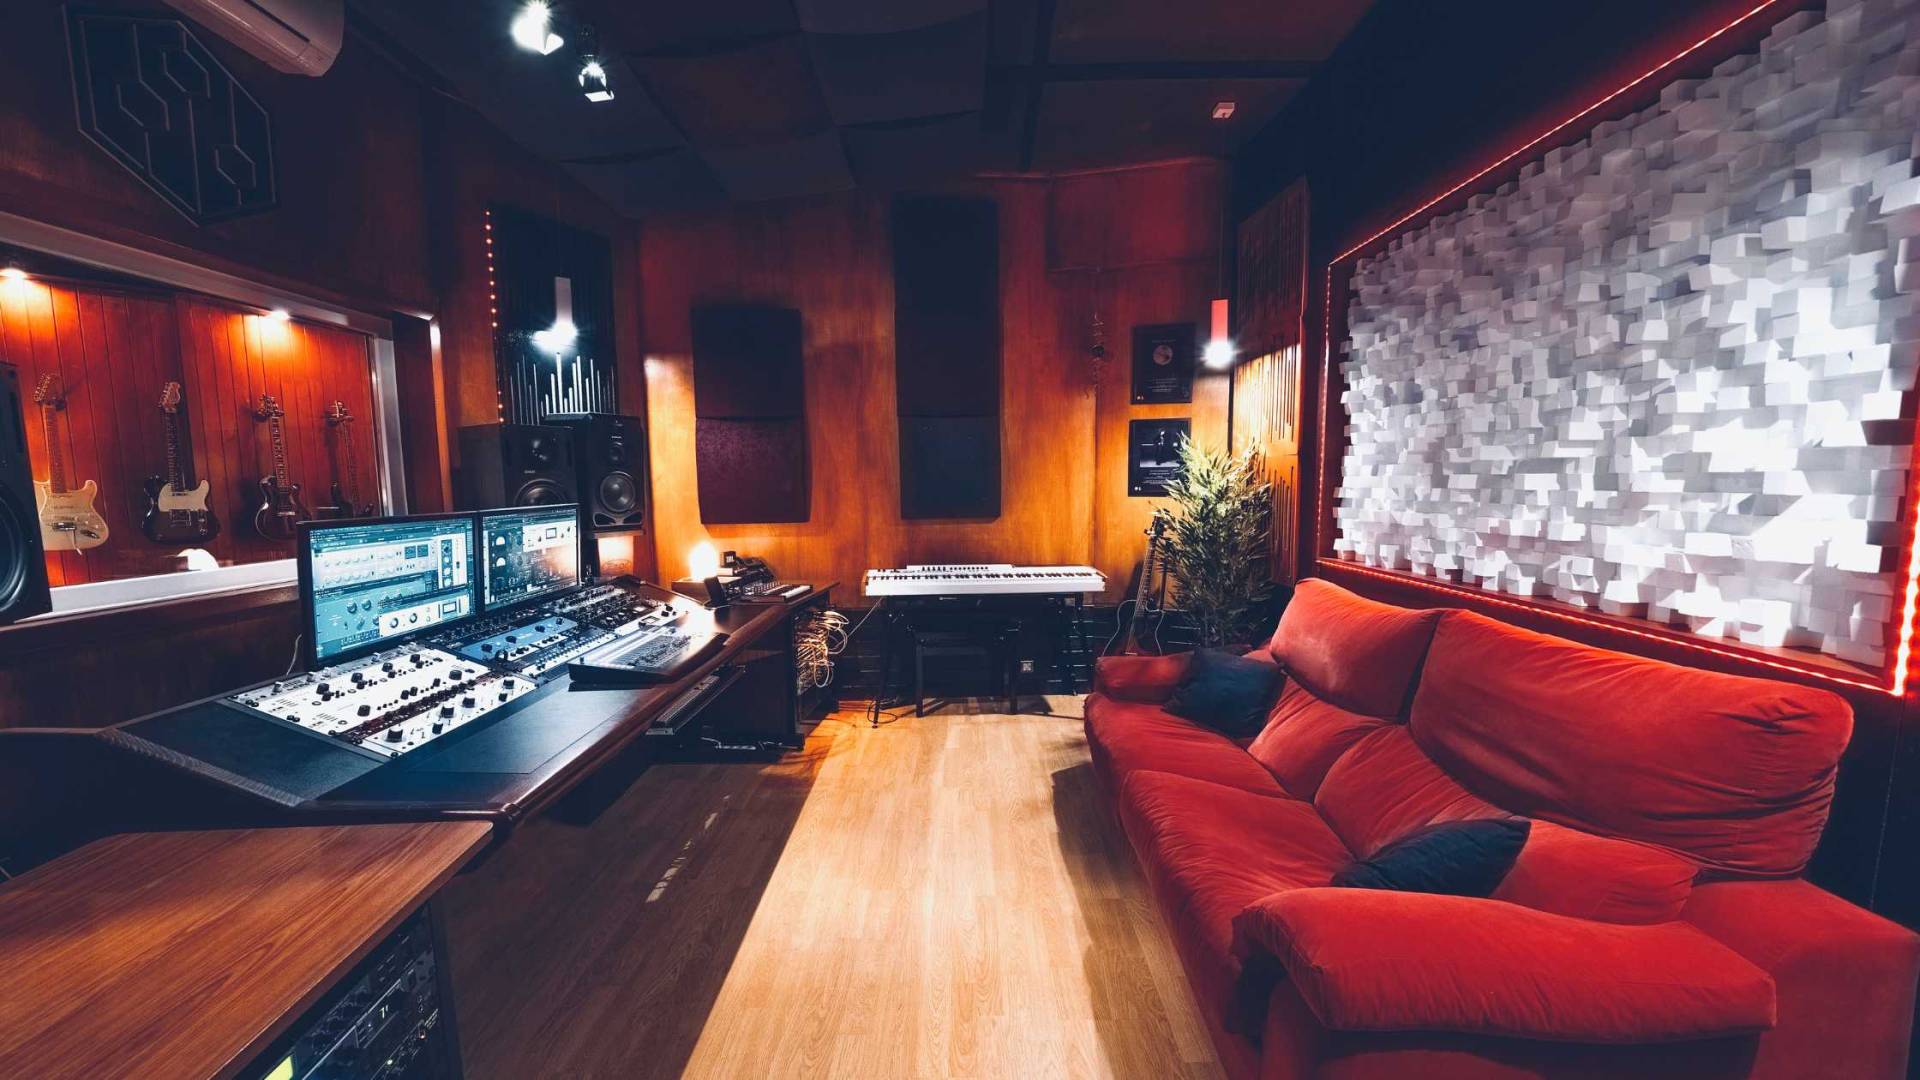 Control room of our recording studio from the live room